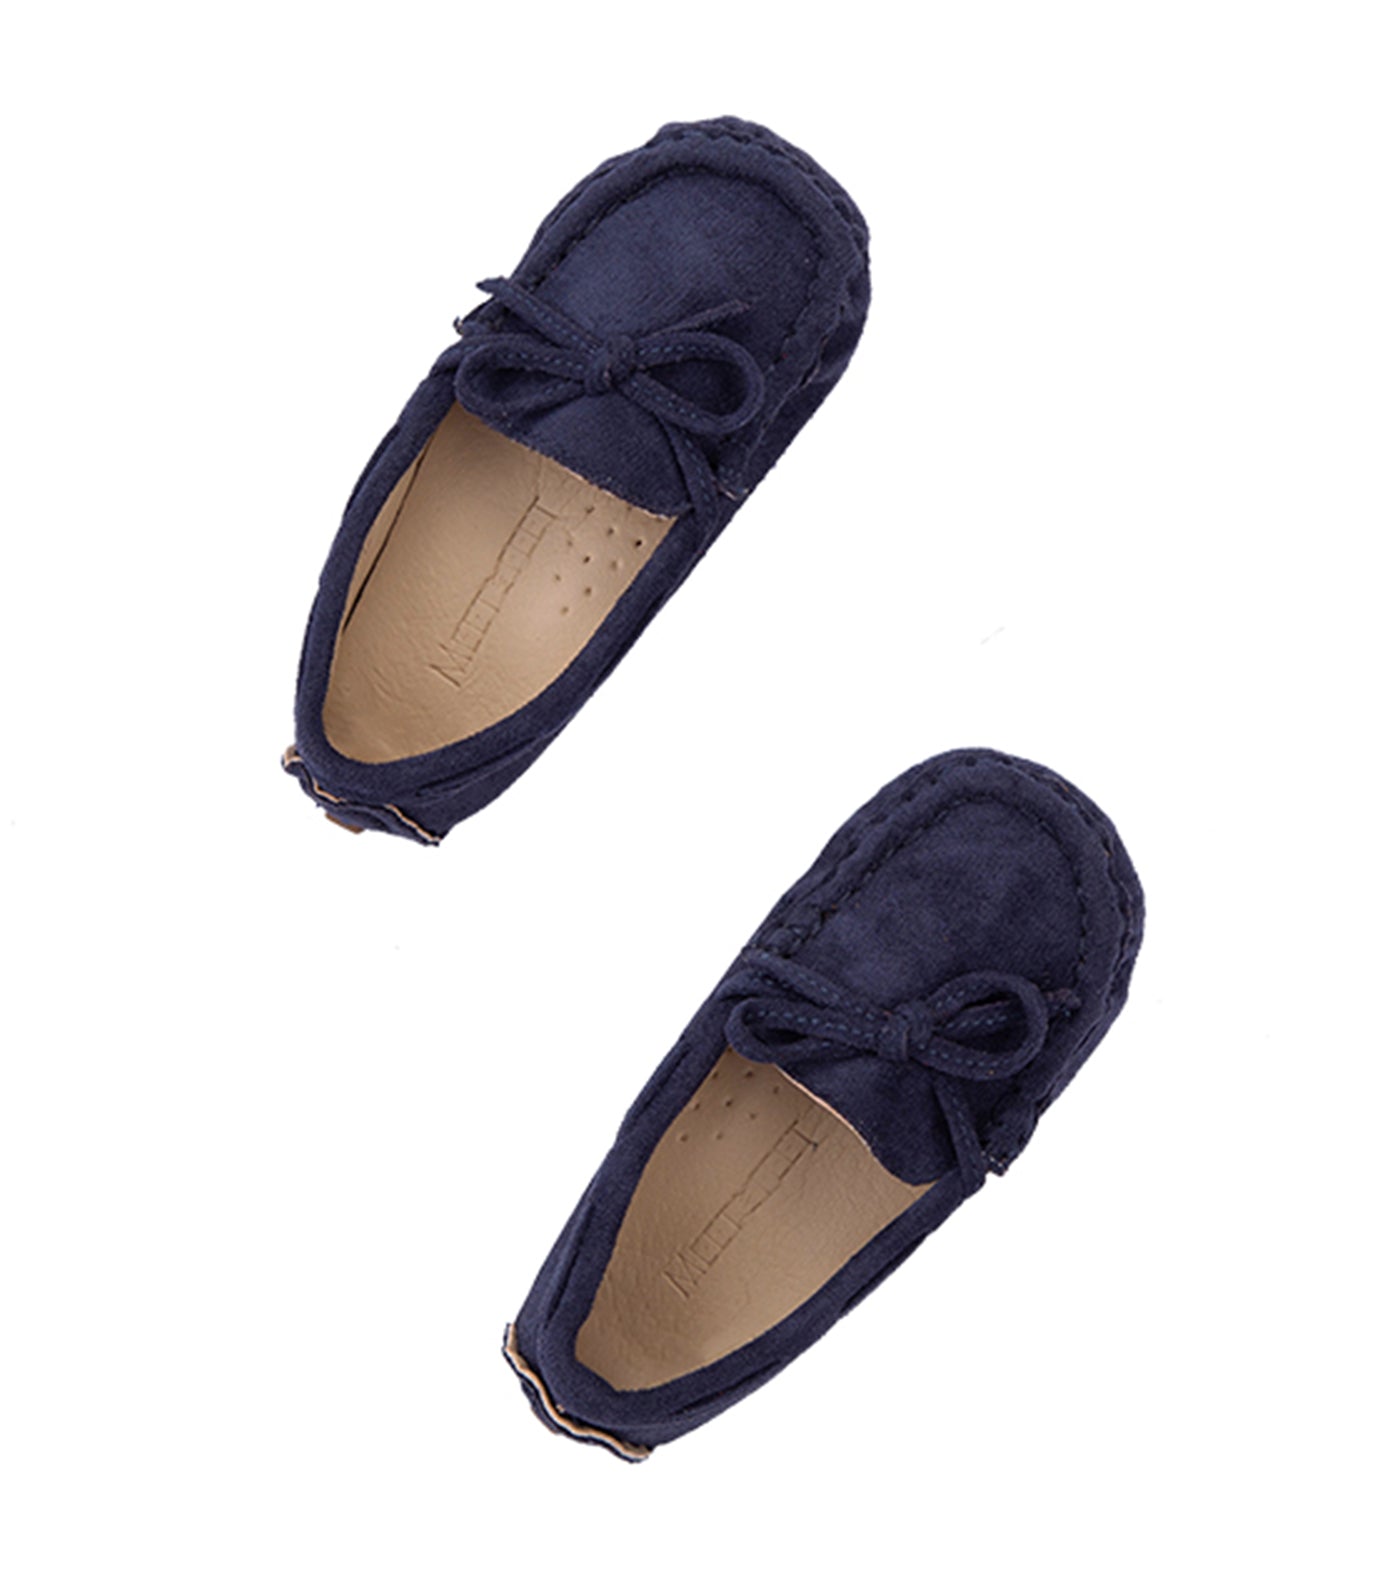 Seal Kids Loafers for Boys - Navy Blue